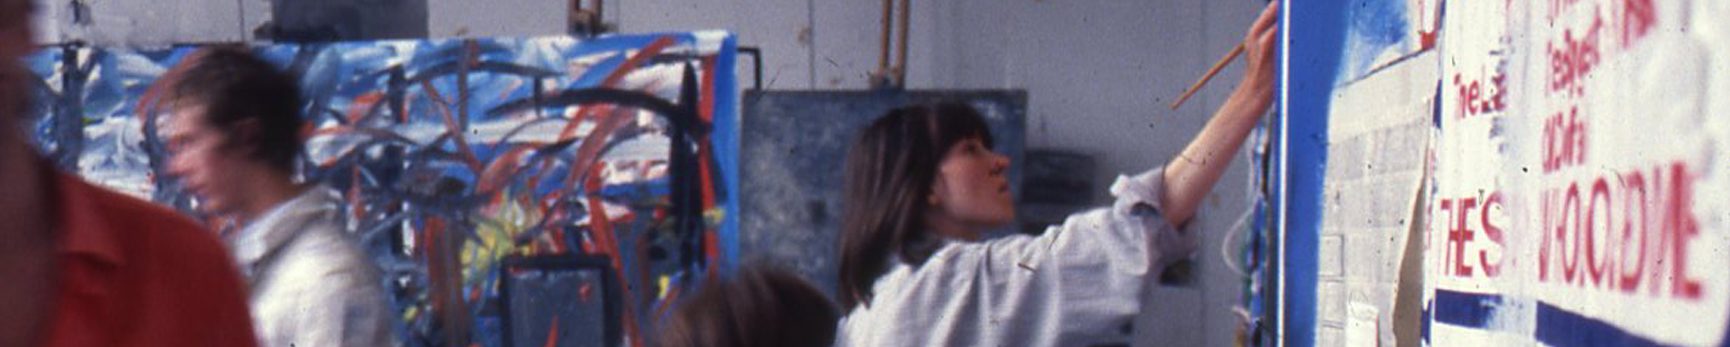 Young woman with short dark brown hair painting in an art school surrounded by abstract paintings and other students